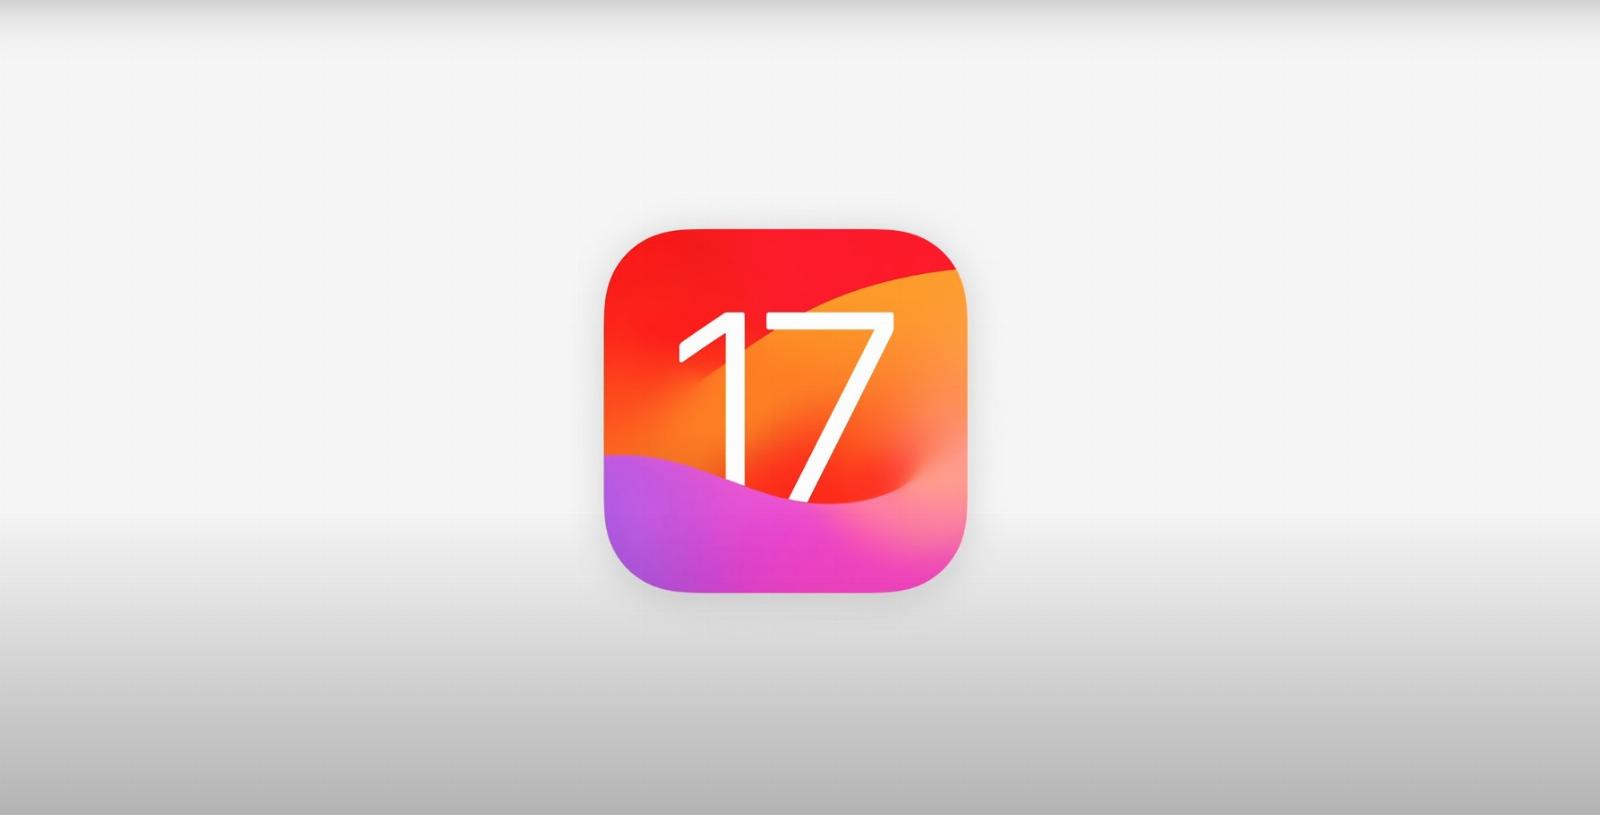 Here are the iOS 17 features Apple didn’t announce onstage